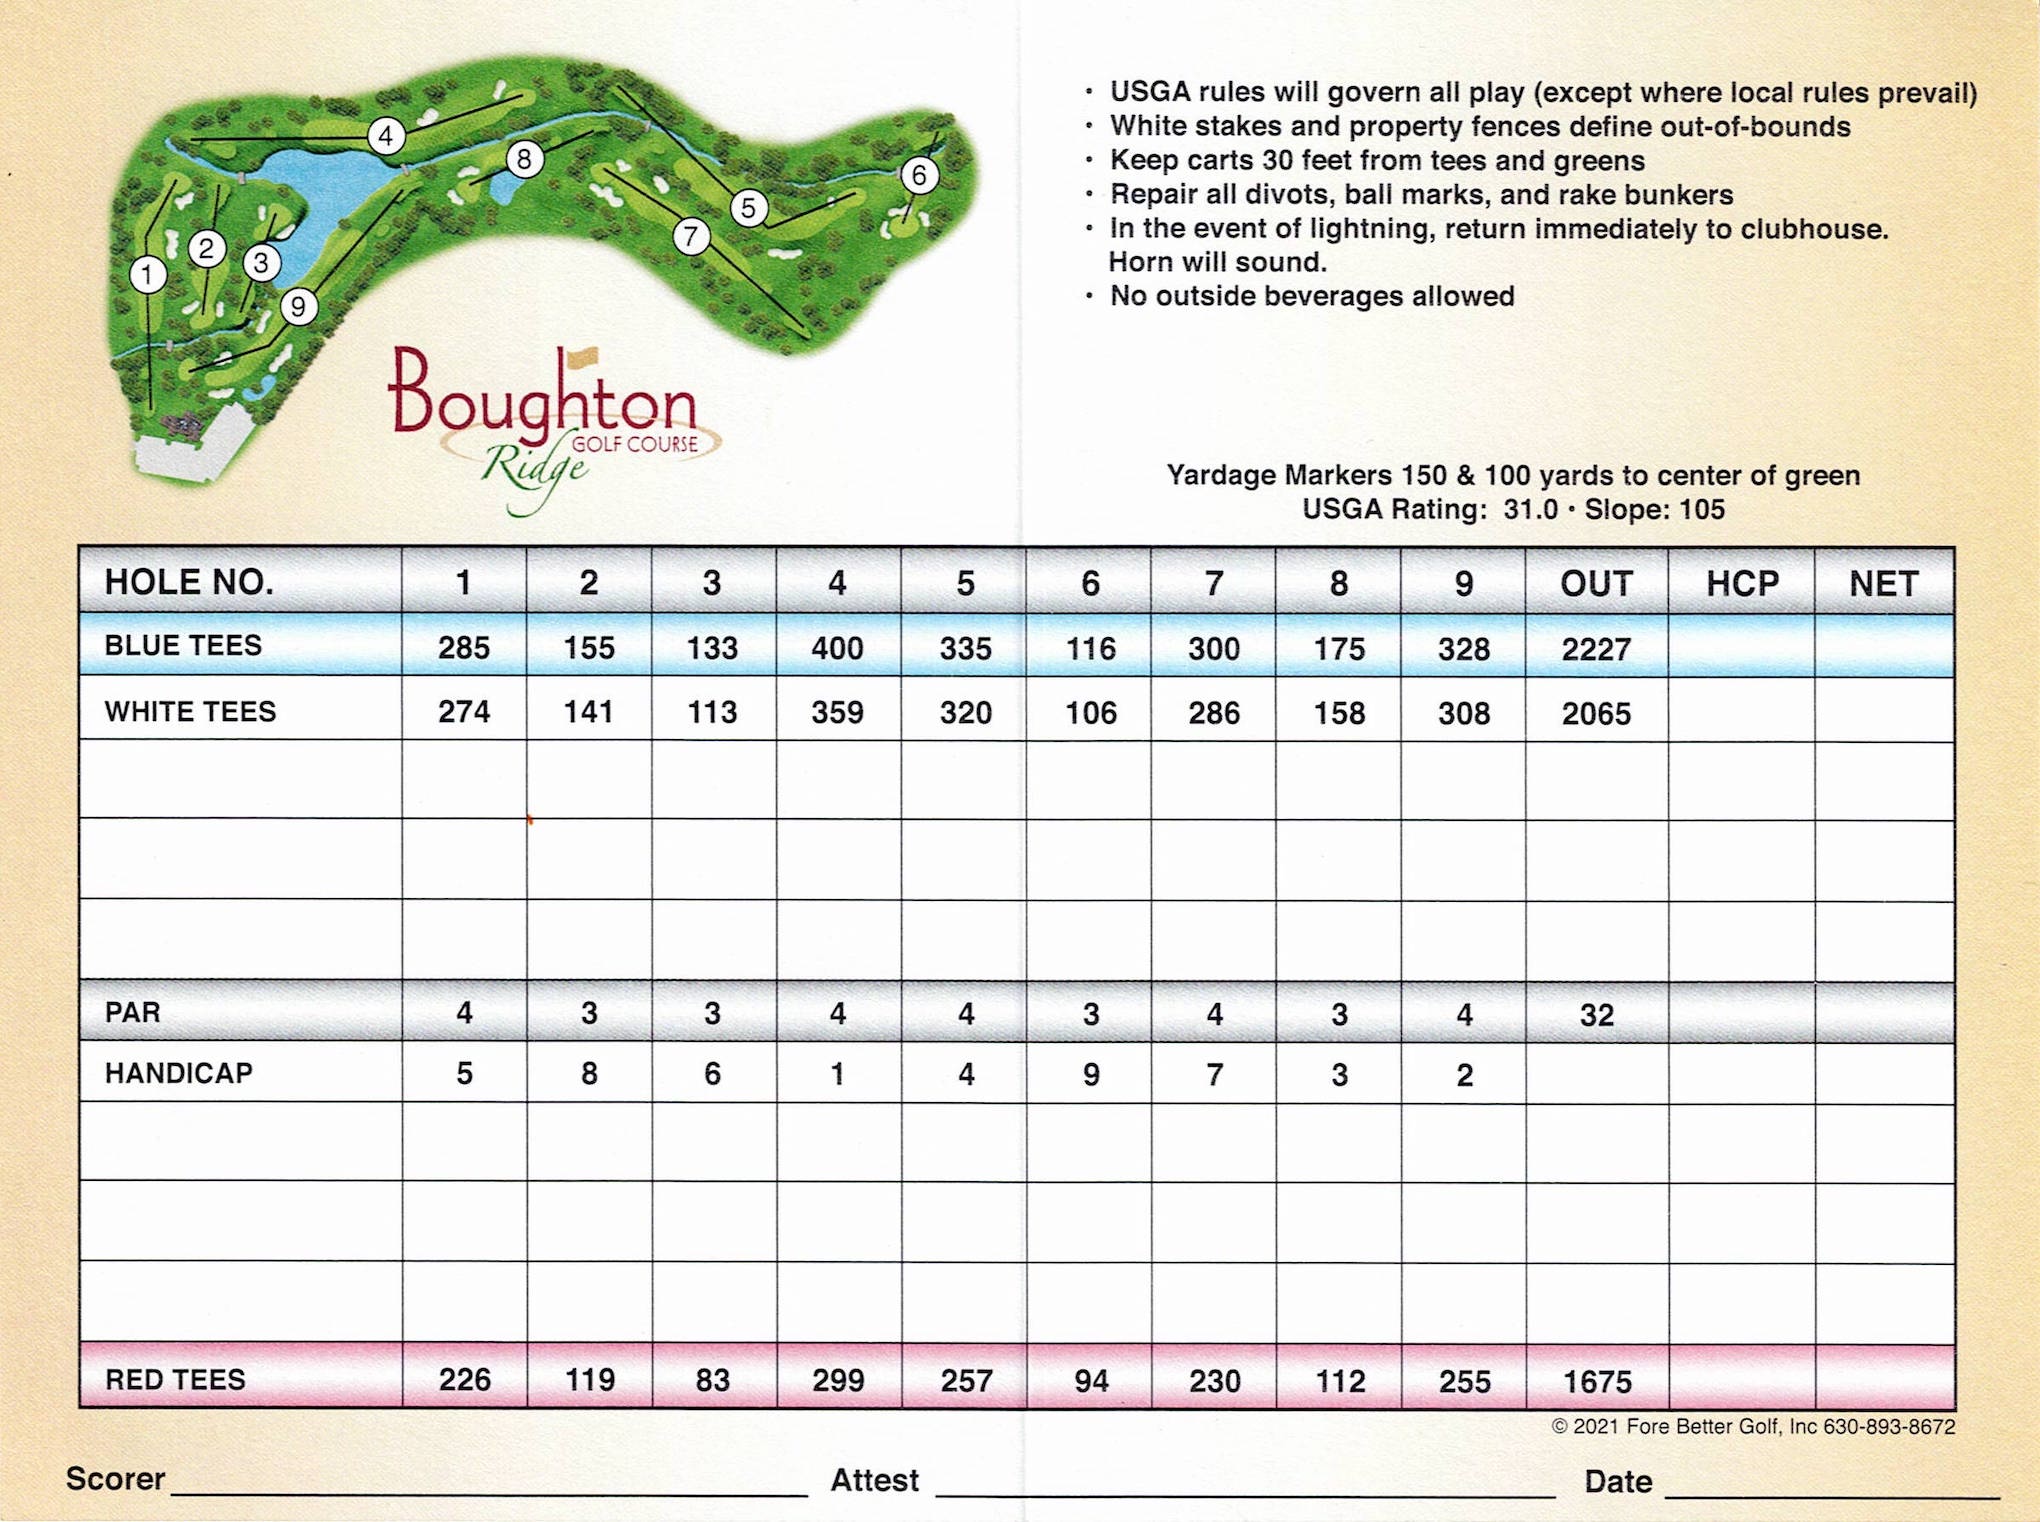 Scan of the scorecard from Boughton Ridge Golf Course in Bolingbrook, Illinois. 